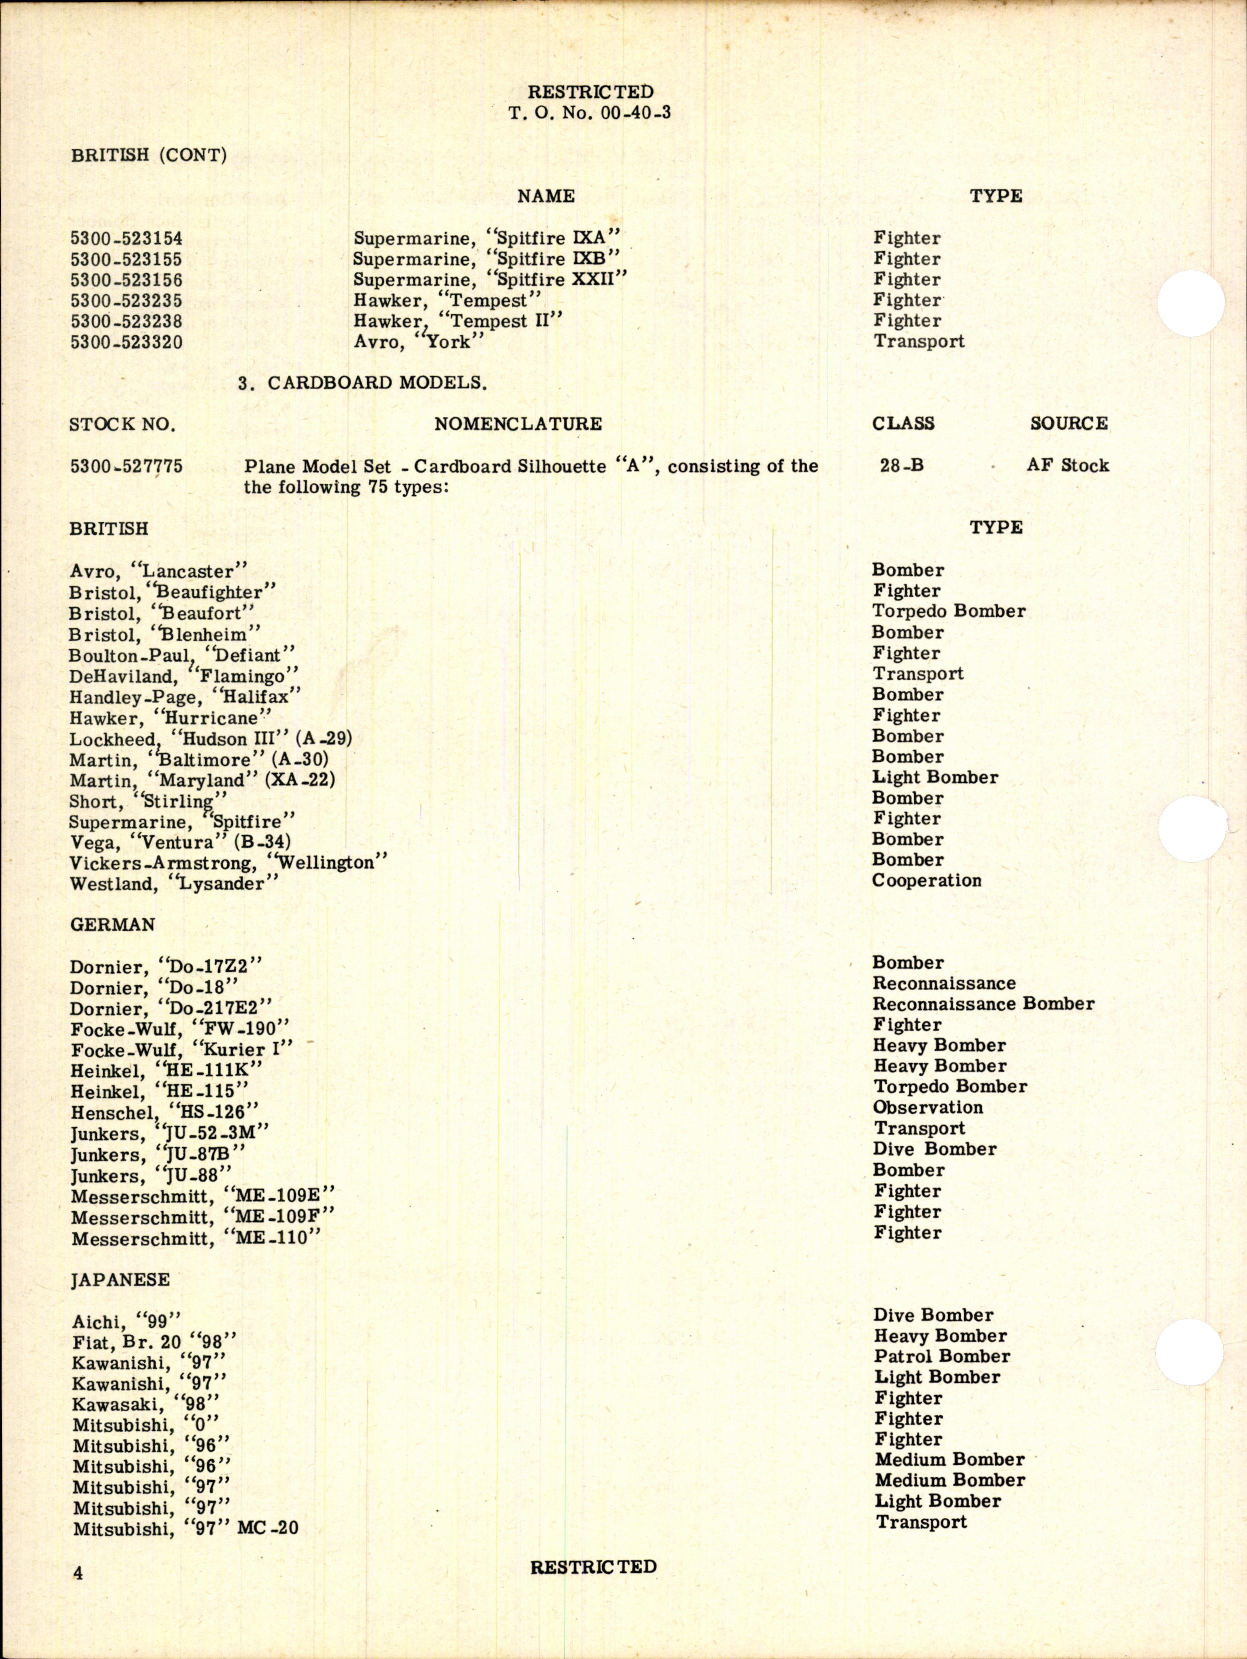 Sample page 4 from AirCorps Library document: Recognition Material; Composition of Plastic Airplane Model Series and Cardboard Model Sets